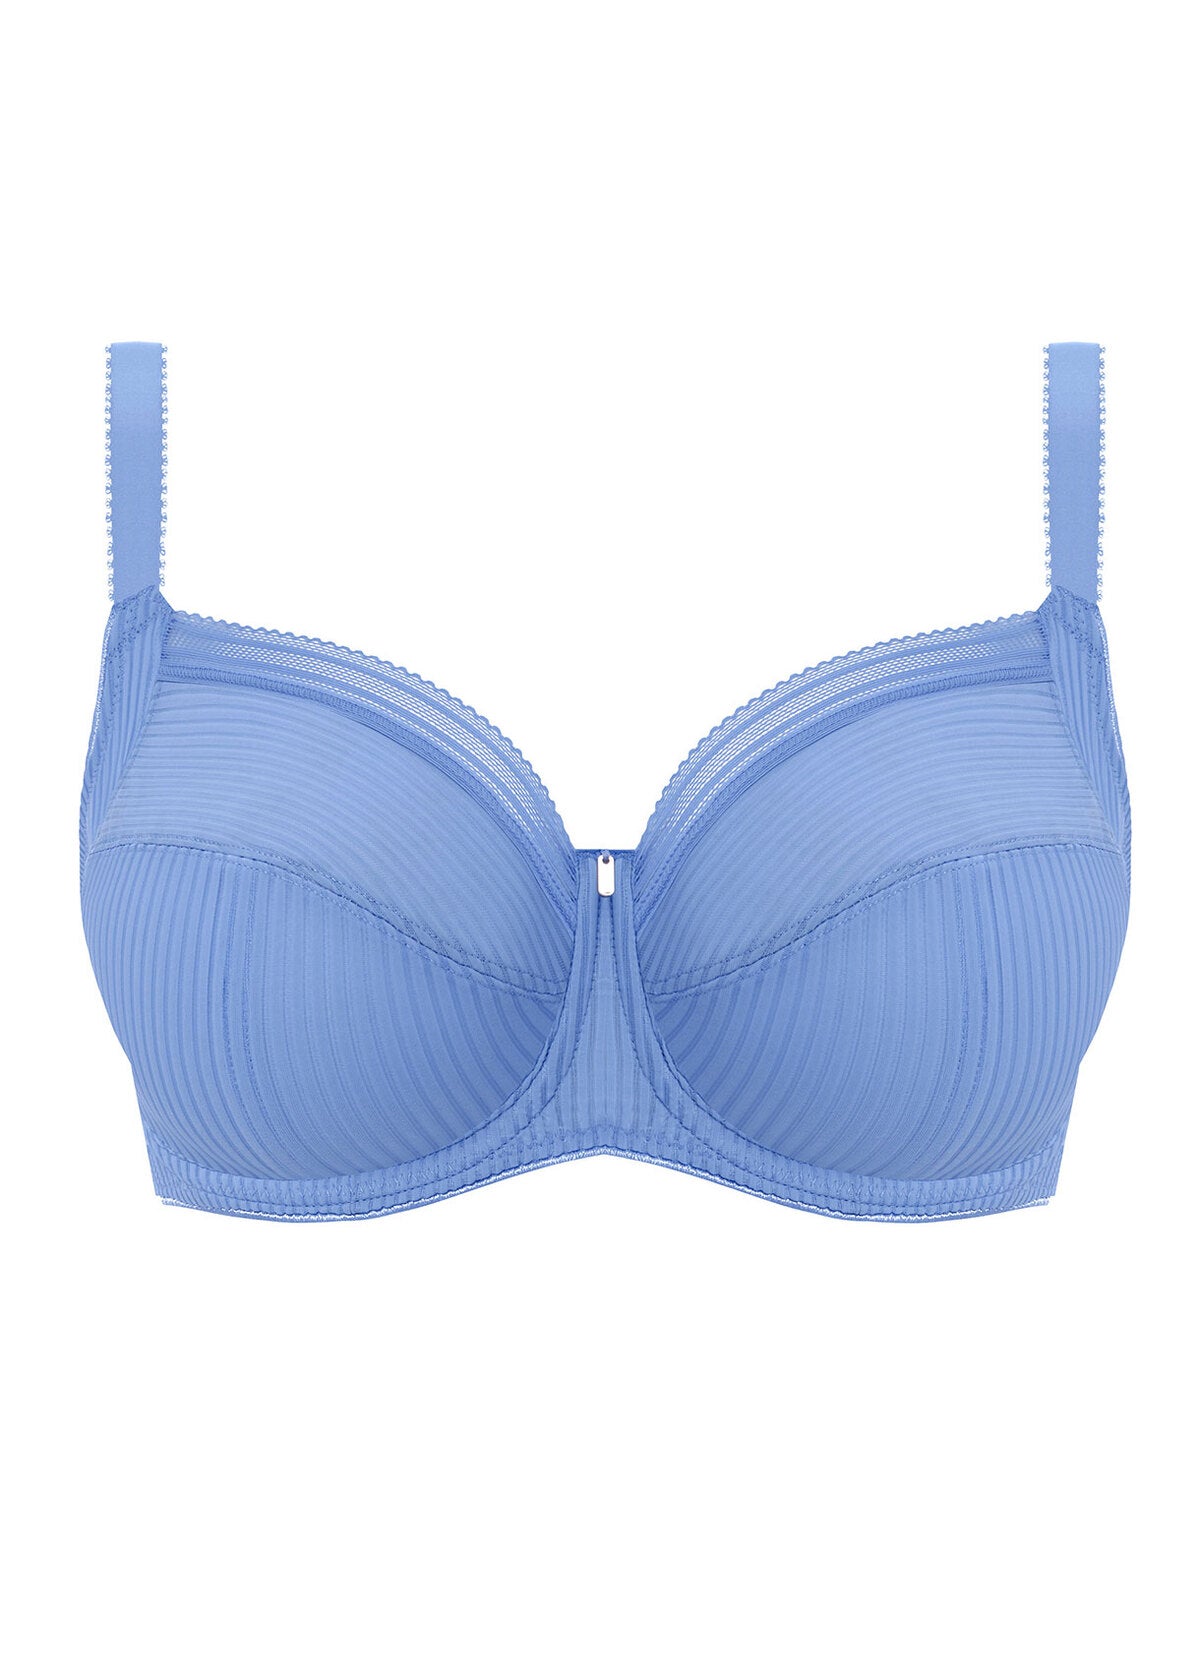 Fusion Underwired Full Cup Side Support Bra In Sapphire - Fantasie